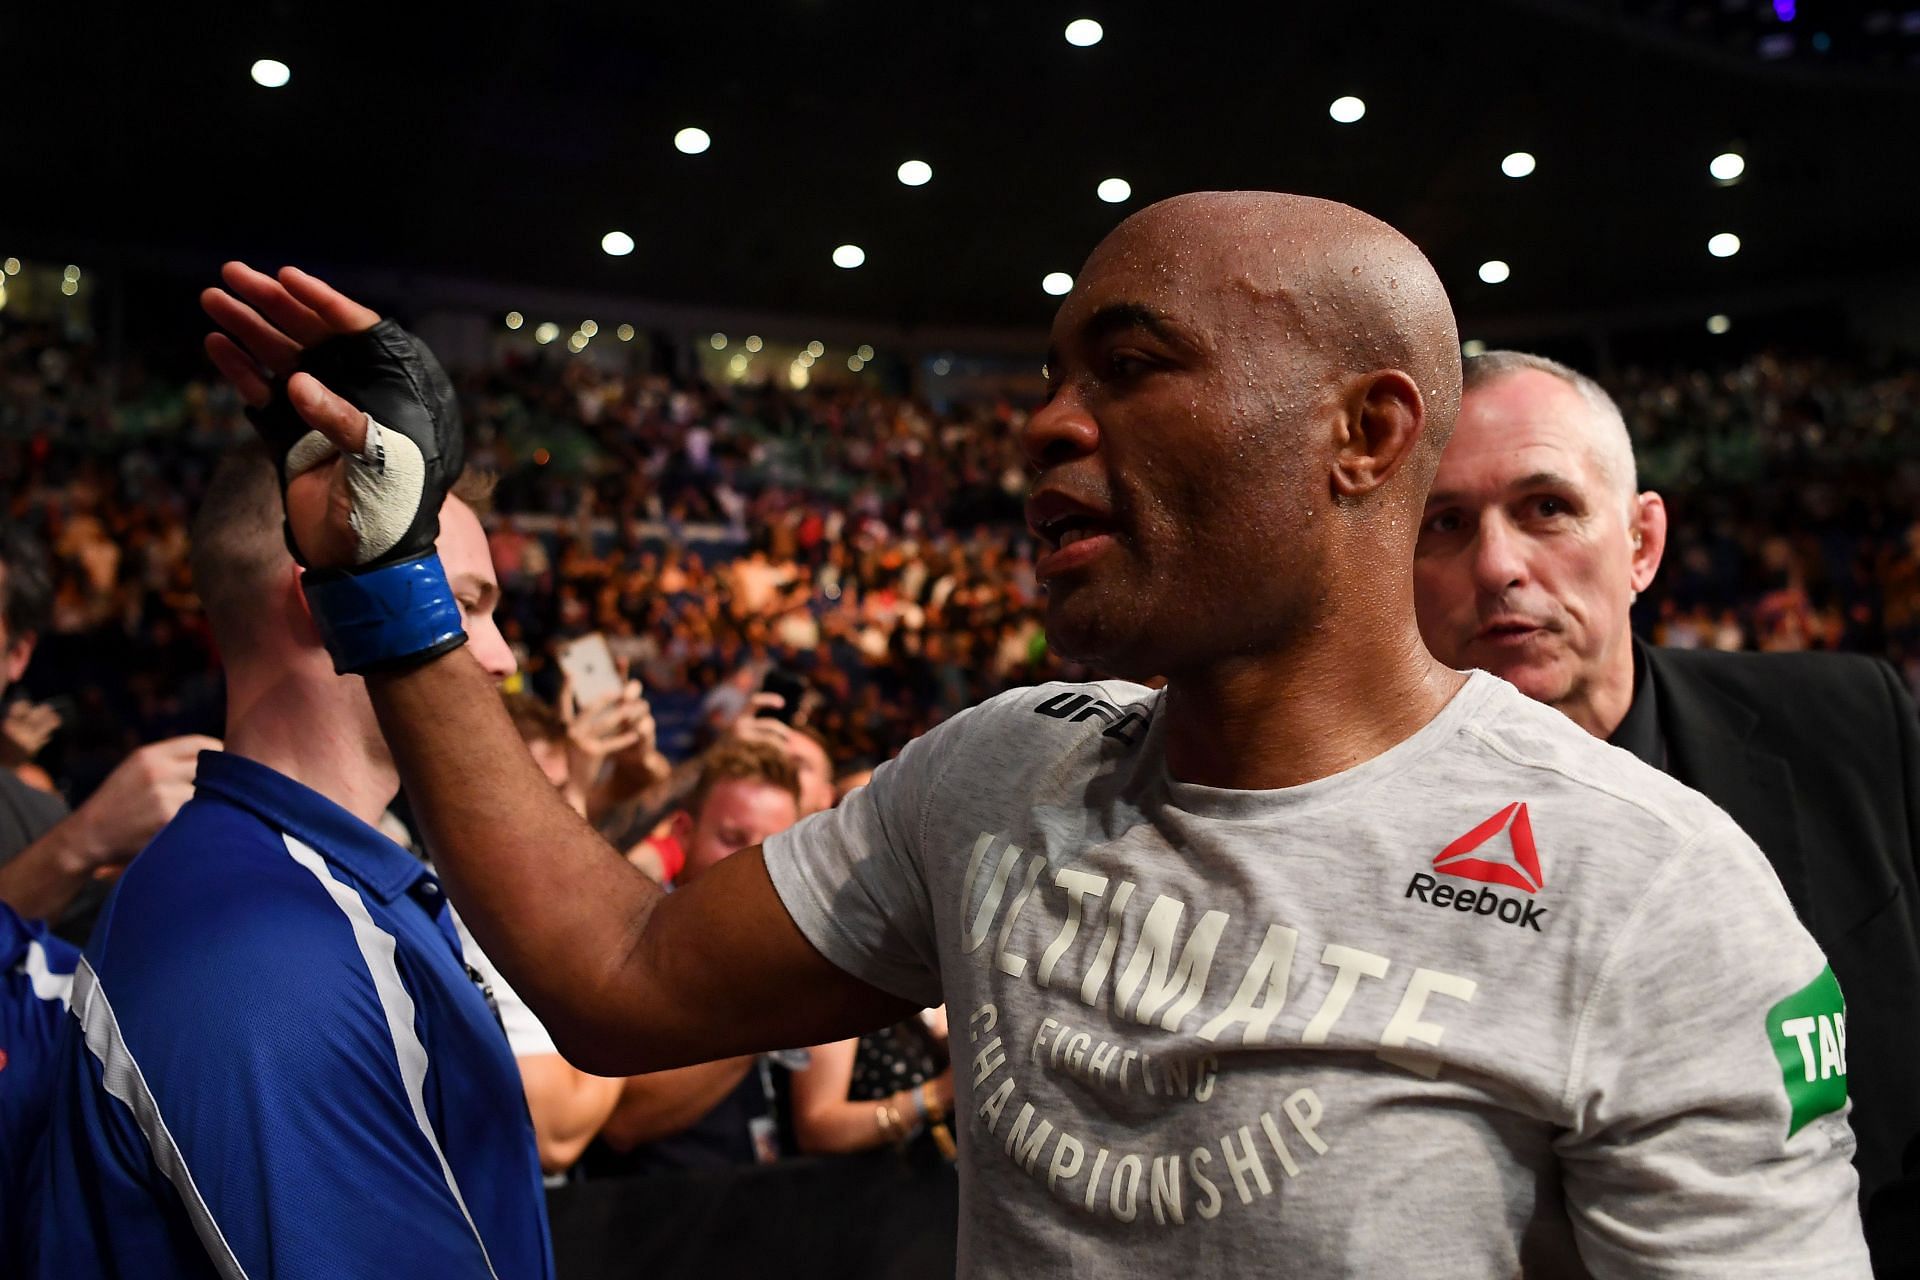 Anderson Silva held the middleweight title for nearly seven years